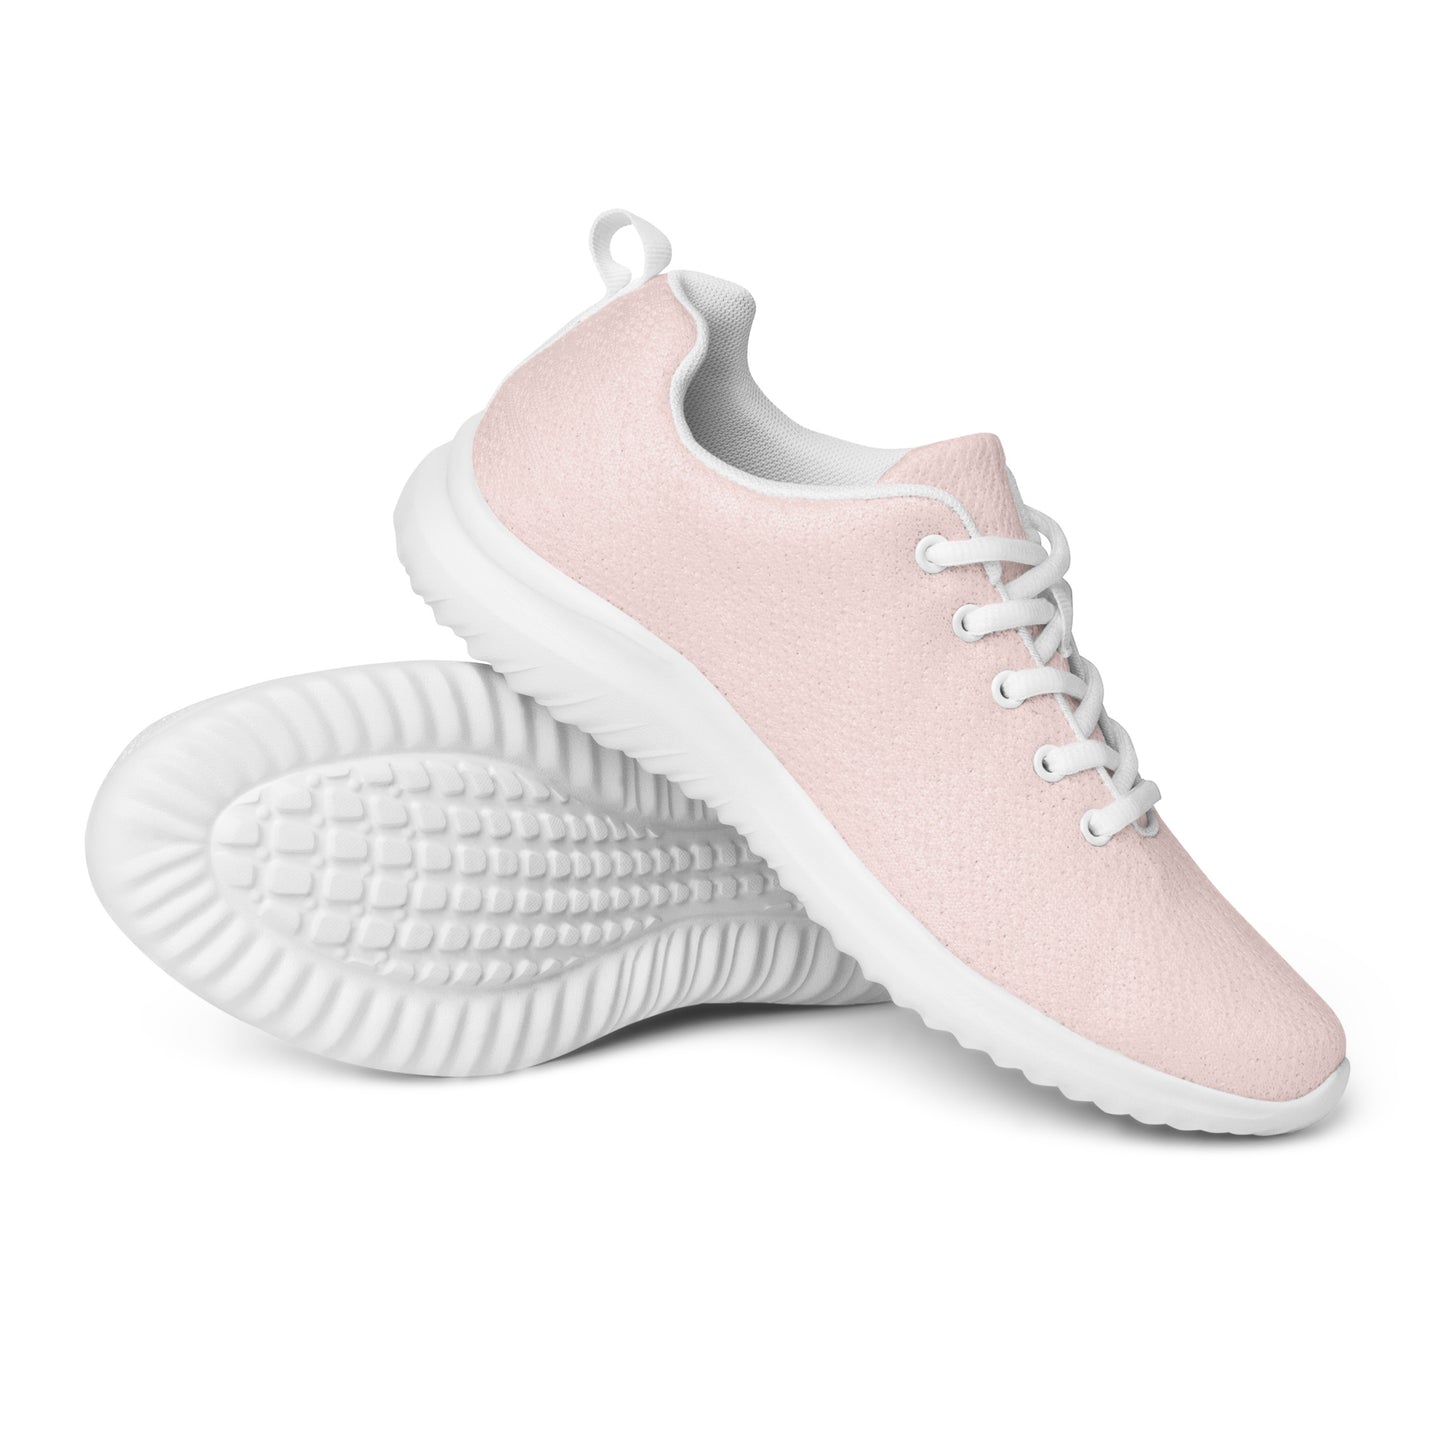 Women’s Misty Rose Athletic Shoes